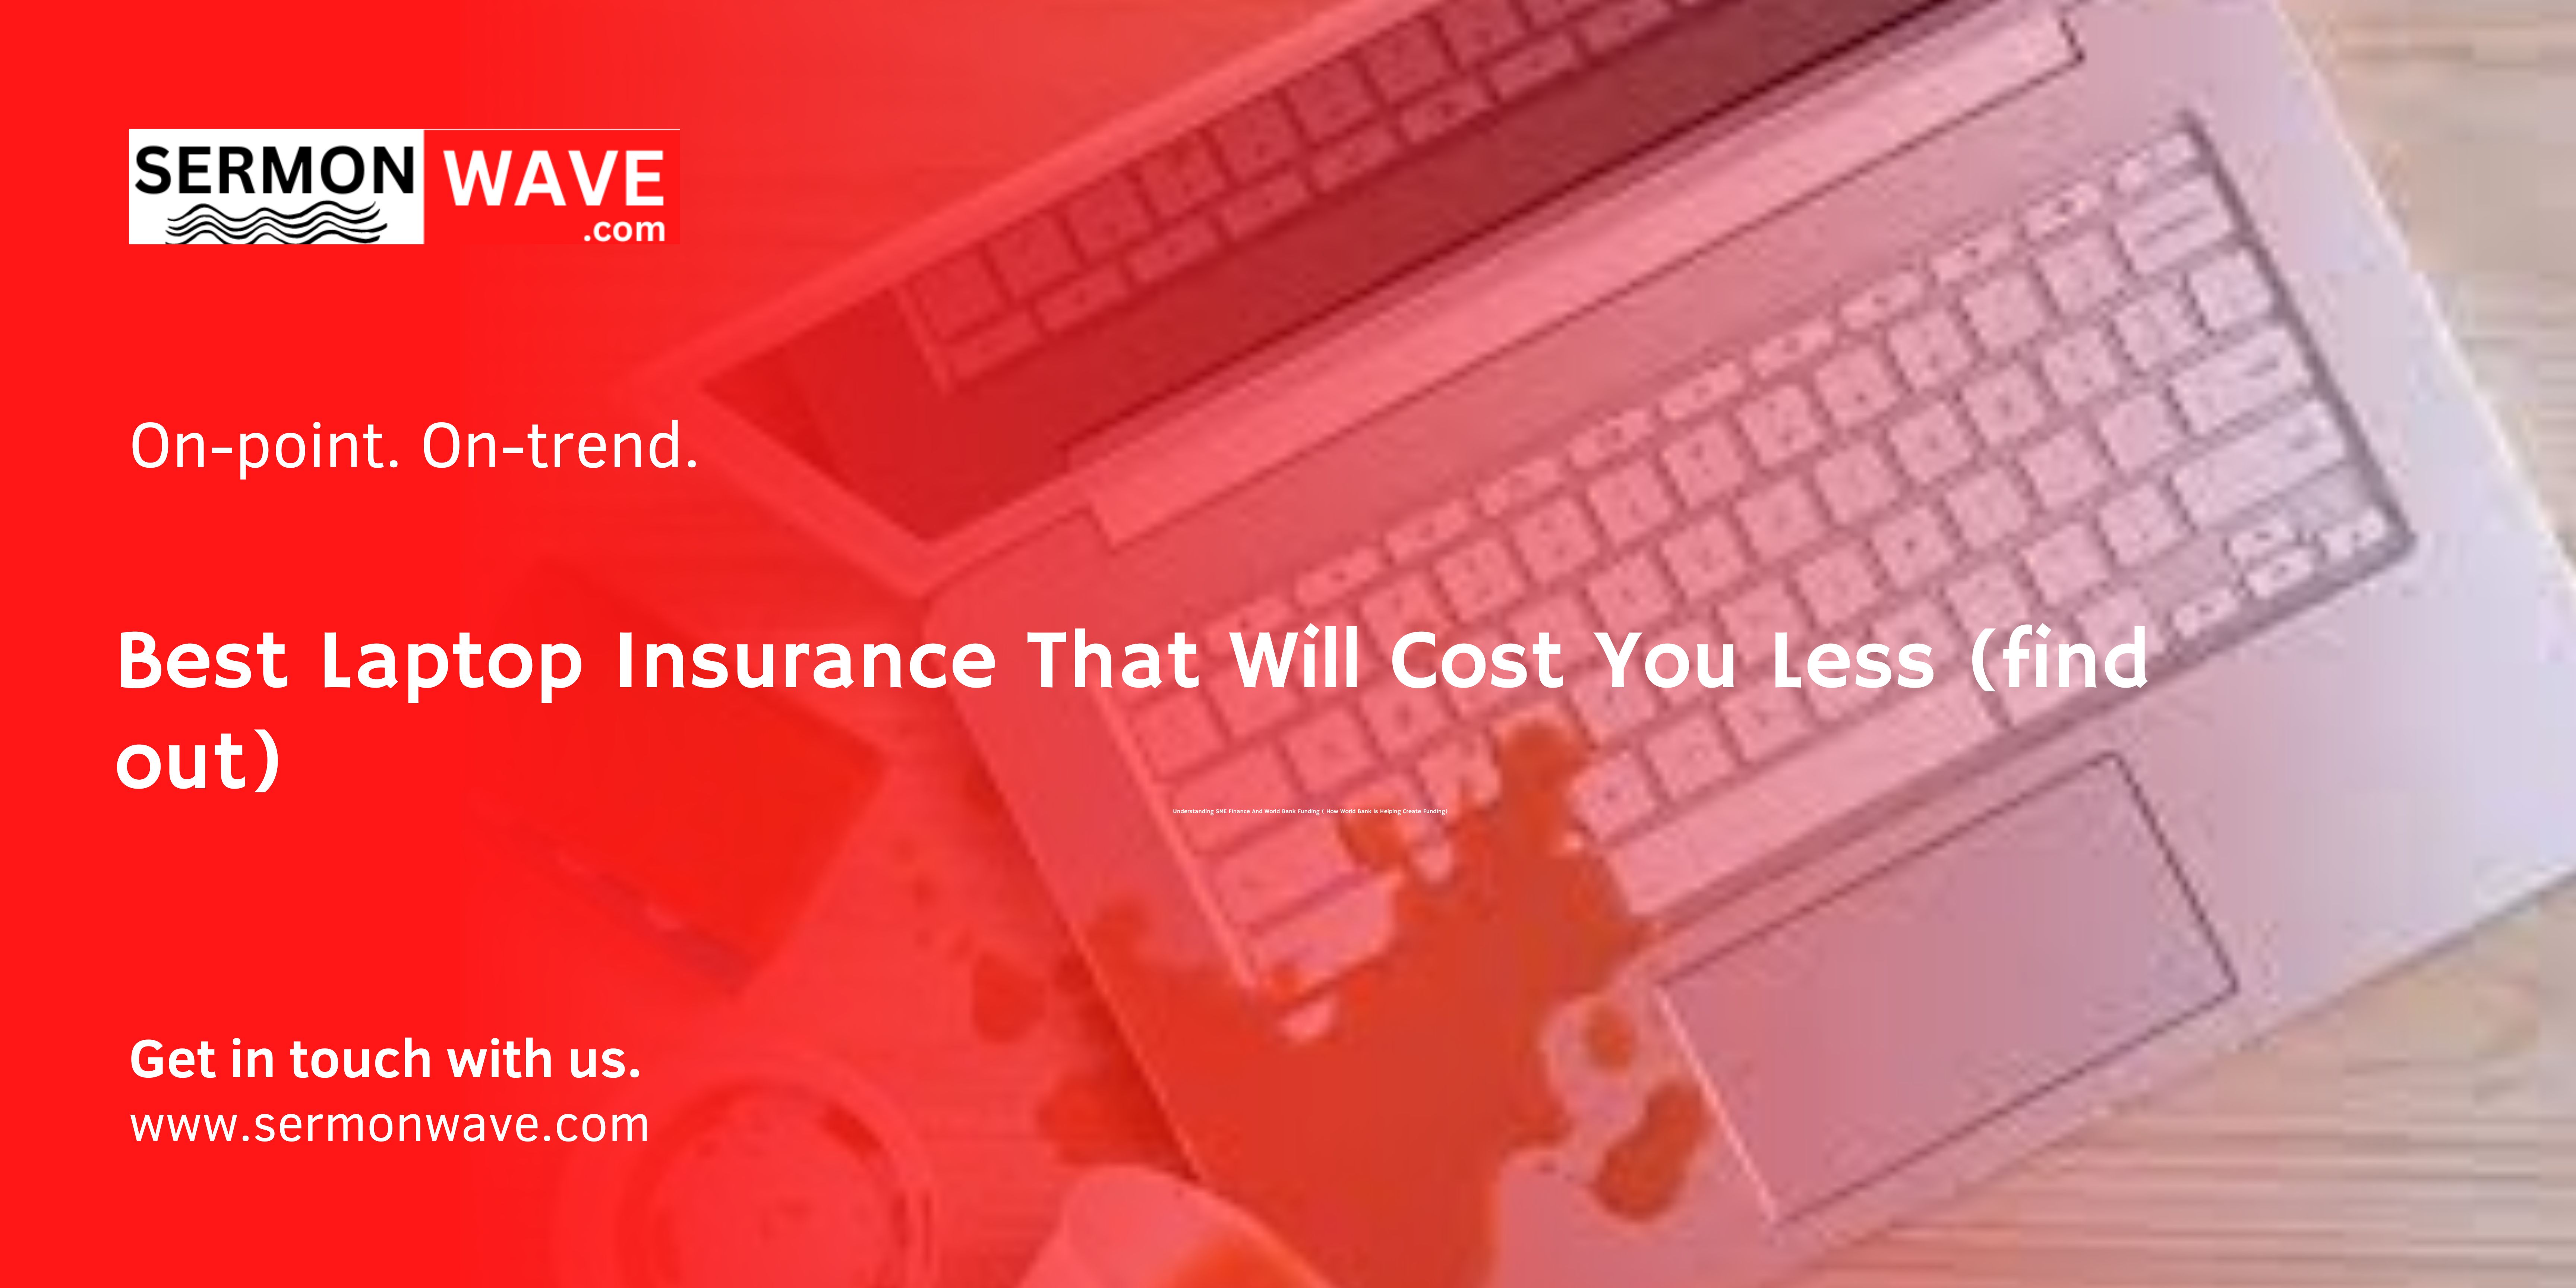 Best Laptop Insurance That Will Cost You Less (find out)